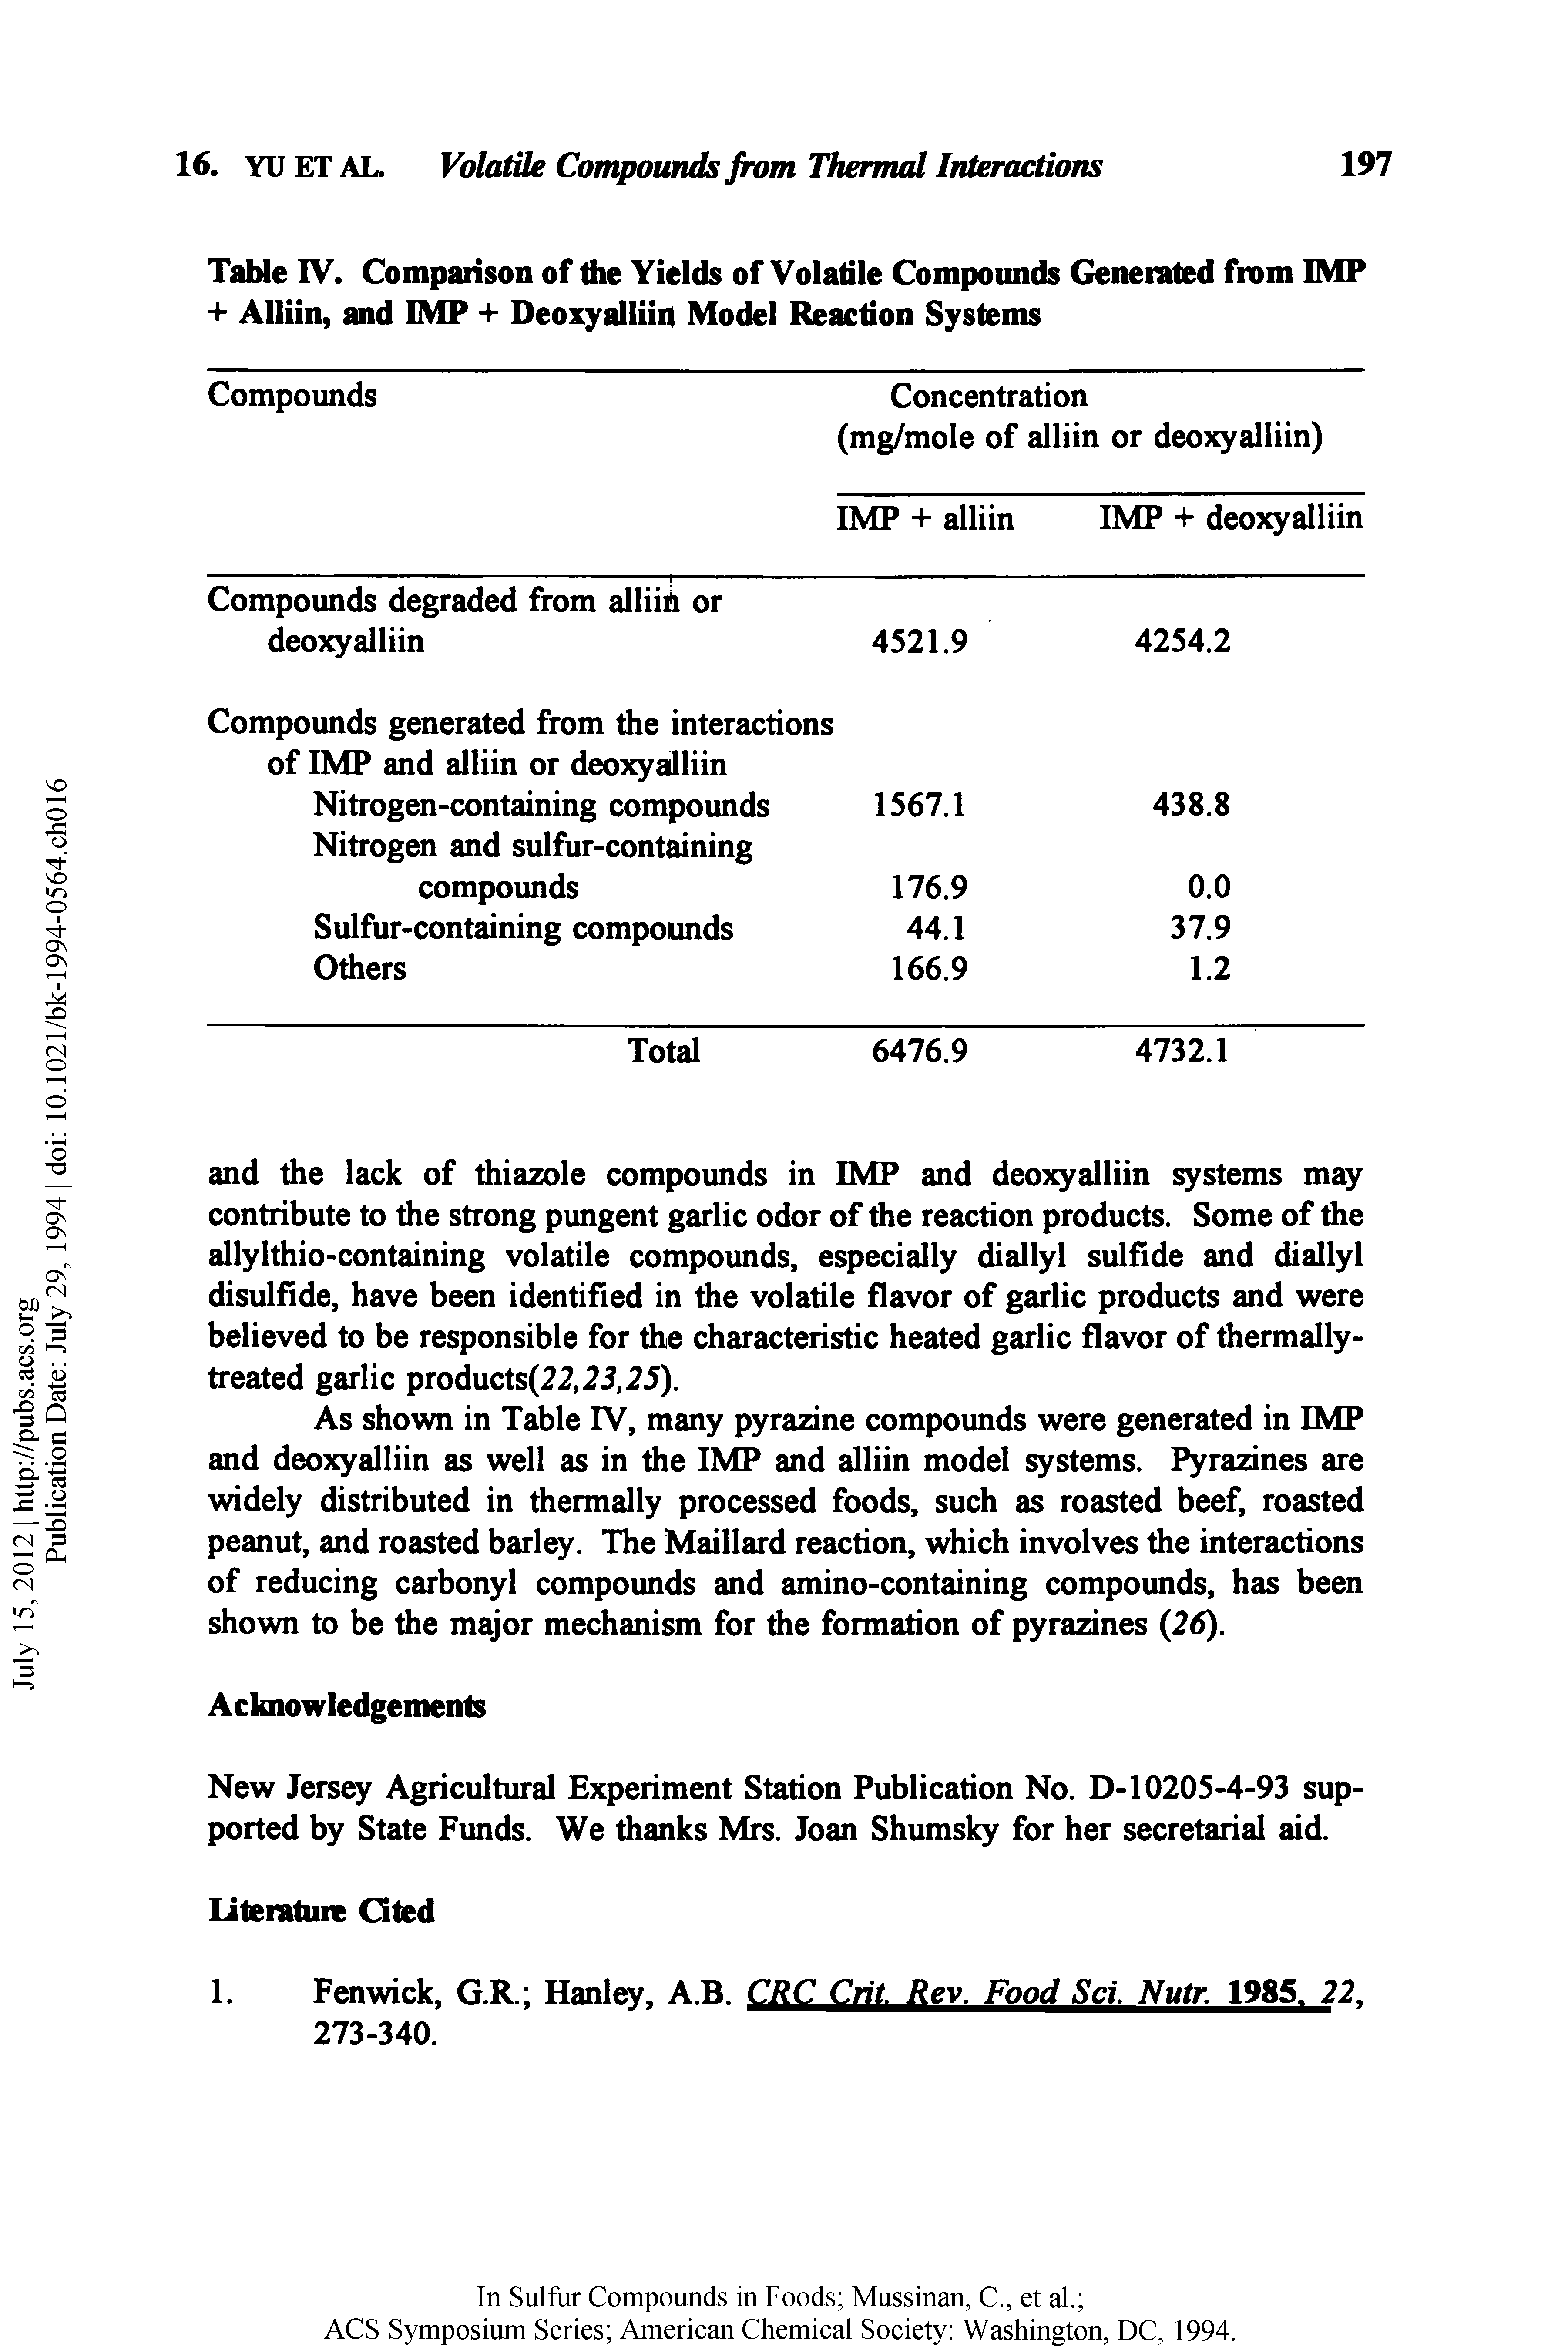 Table IV. Comparison of the Yields of Volatile Compounds Generated from IMP + Alliin, and BMP + Deoxyalliin Model Reaction Systems...